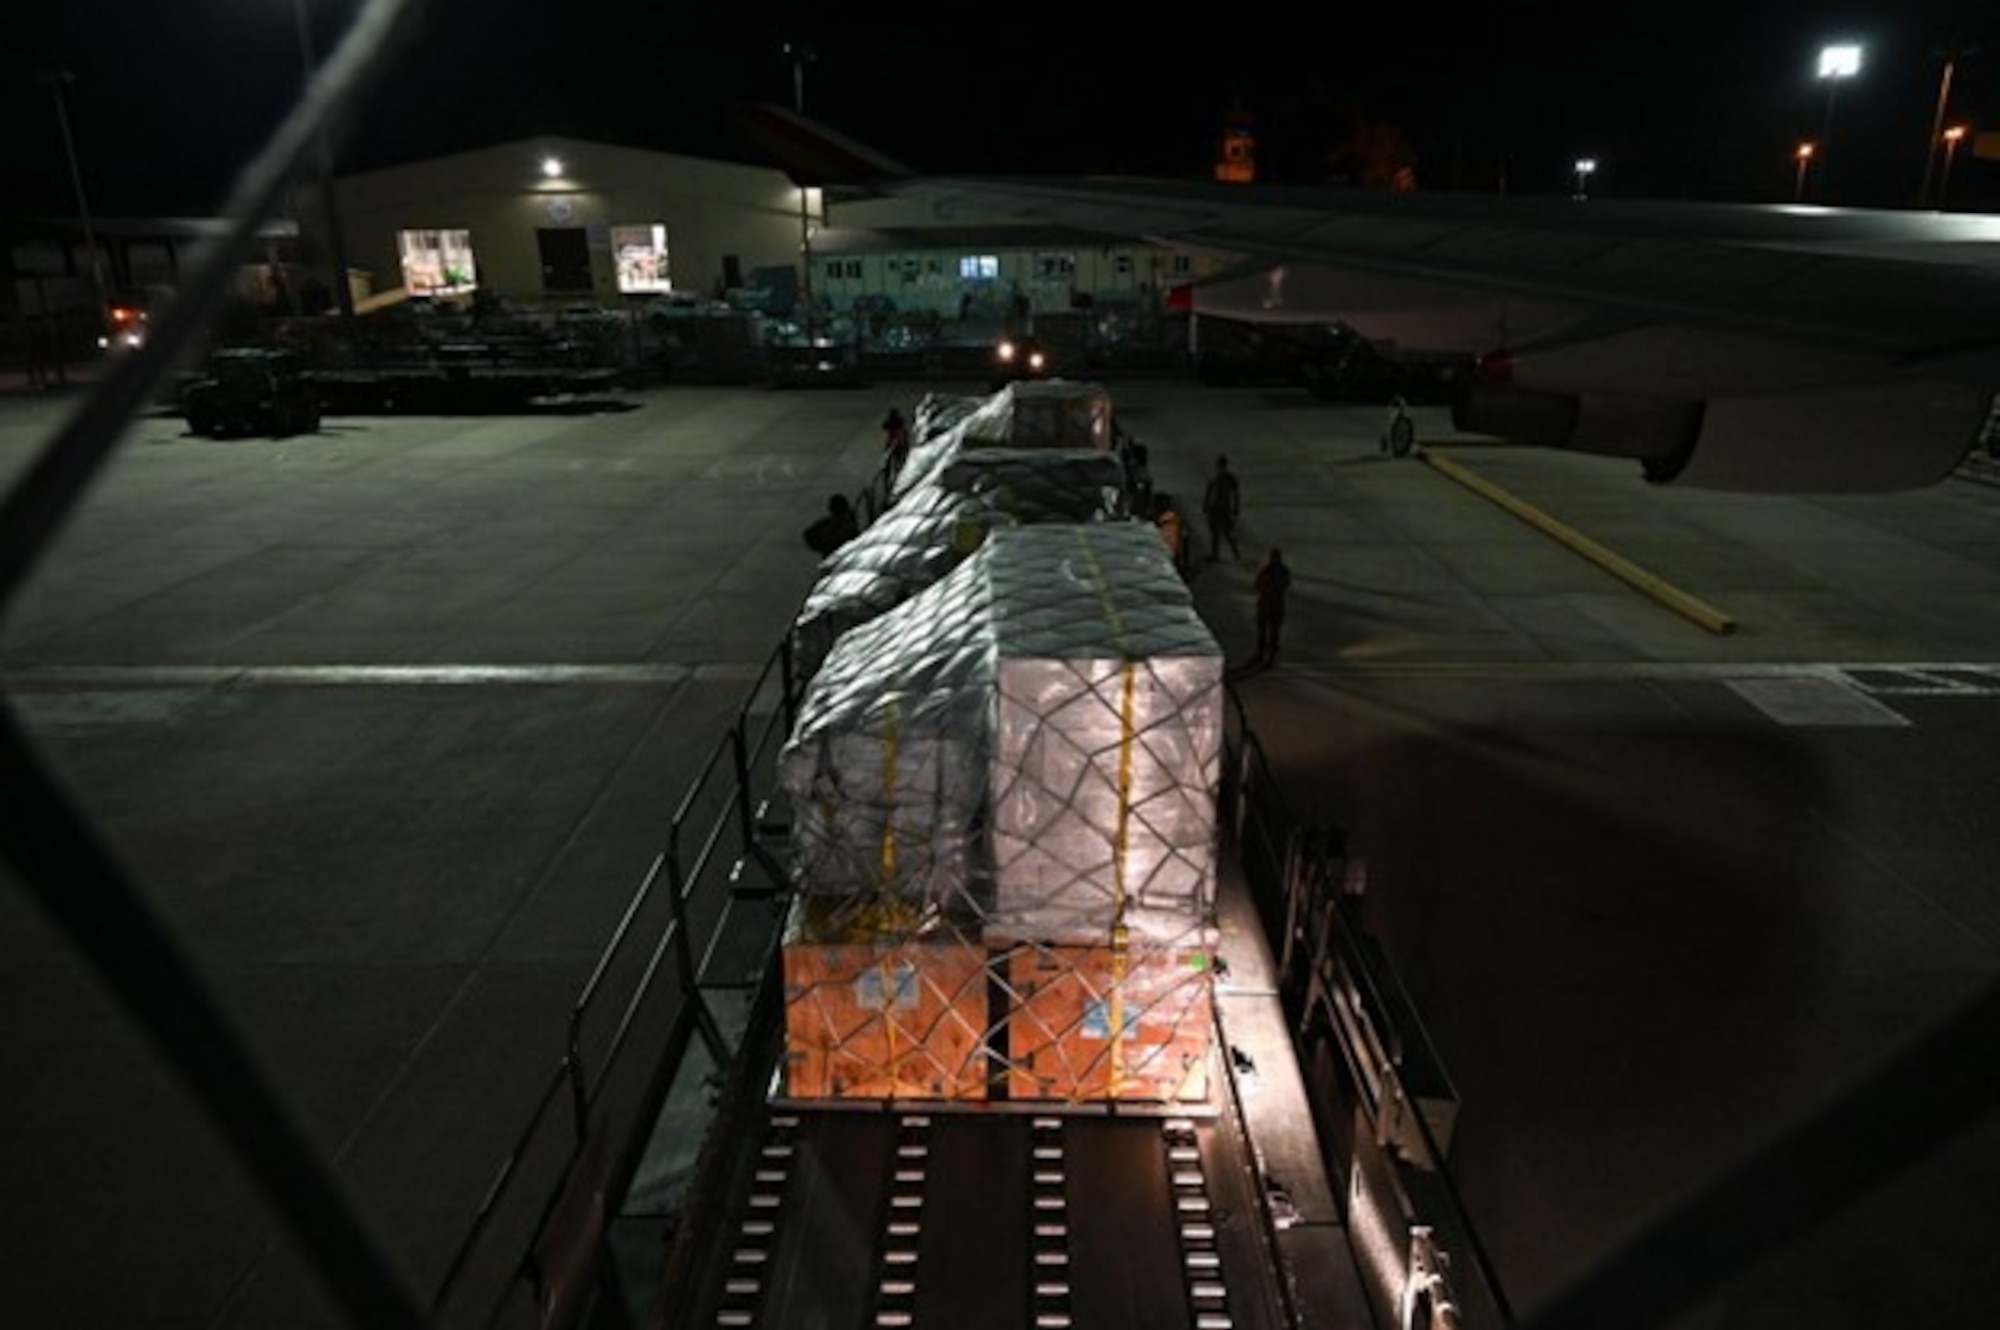 Members from the 728th Air Mobility Squadron assist humanitarian relief efforts by offloading a chartered 747-400F containing a 52-bed emergency field hospital tent from U.S. non-government organization Samaritan's Purse at Incirlik Air Base, Türkiye, Feb. 10, 2023. The hospital components will be transported commercially to Antakya, Türkiye to give aid to those in need following the earthquakes that struck Türkiye on Feb. 6. The U.S. military is working in support of U.S. Agency for International Development, the government of Türkiye and our Allies and partners to provide relief to the people of Türkiye. The 39th Air Base Wing is committed to facilitating disaster relief operations to rapidly reduce the suffering of the victims of this disaster. (U.S. Air Force photo by Staff Sgt. Gabrielle Winn)